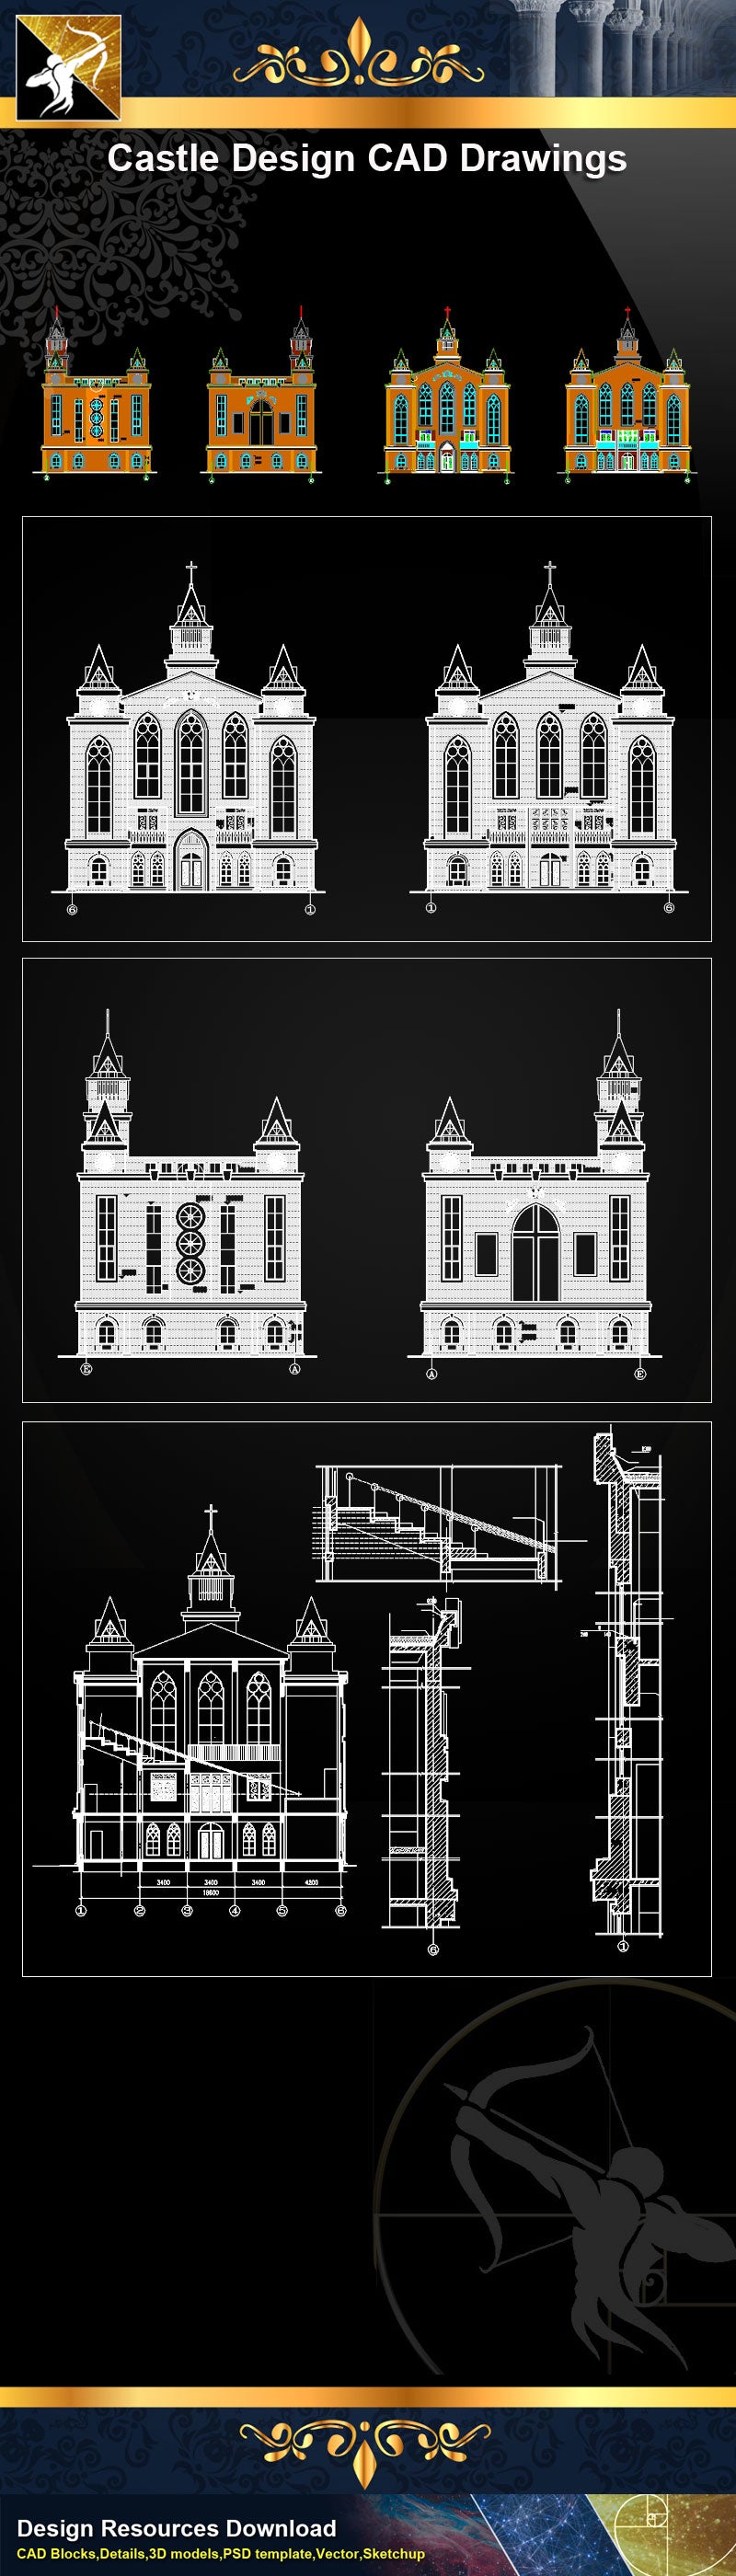 Church Plan,elevation,Details CAD Drawings